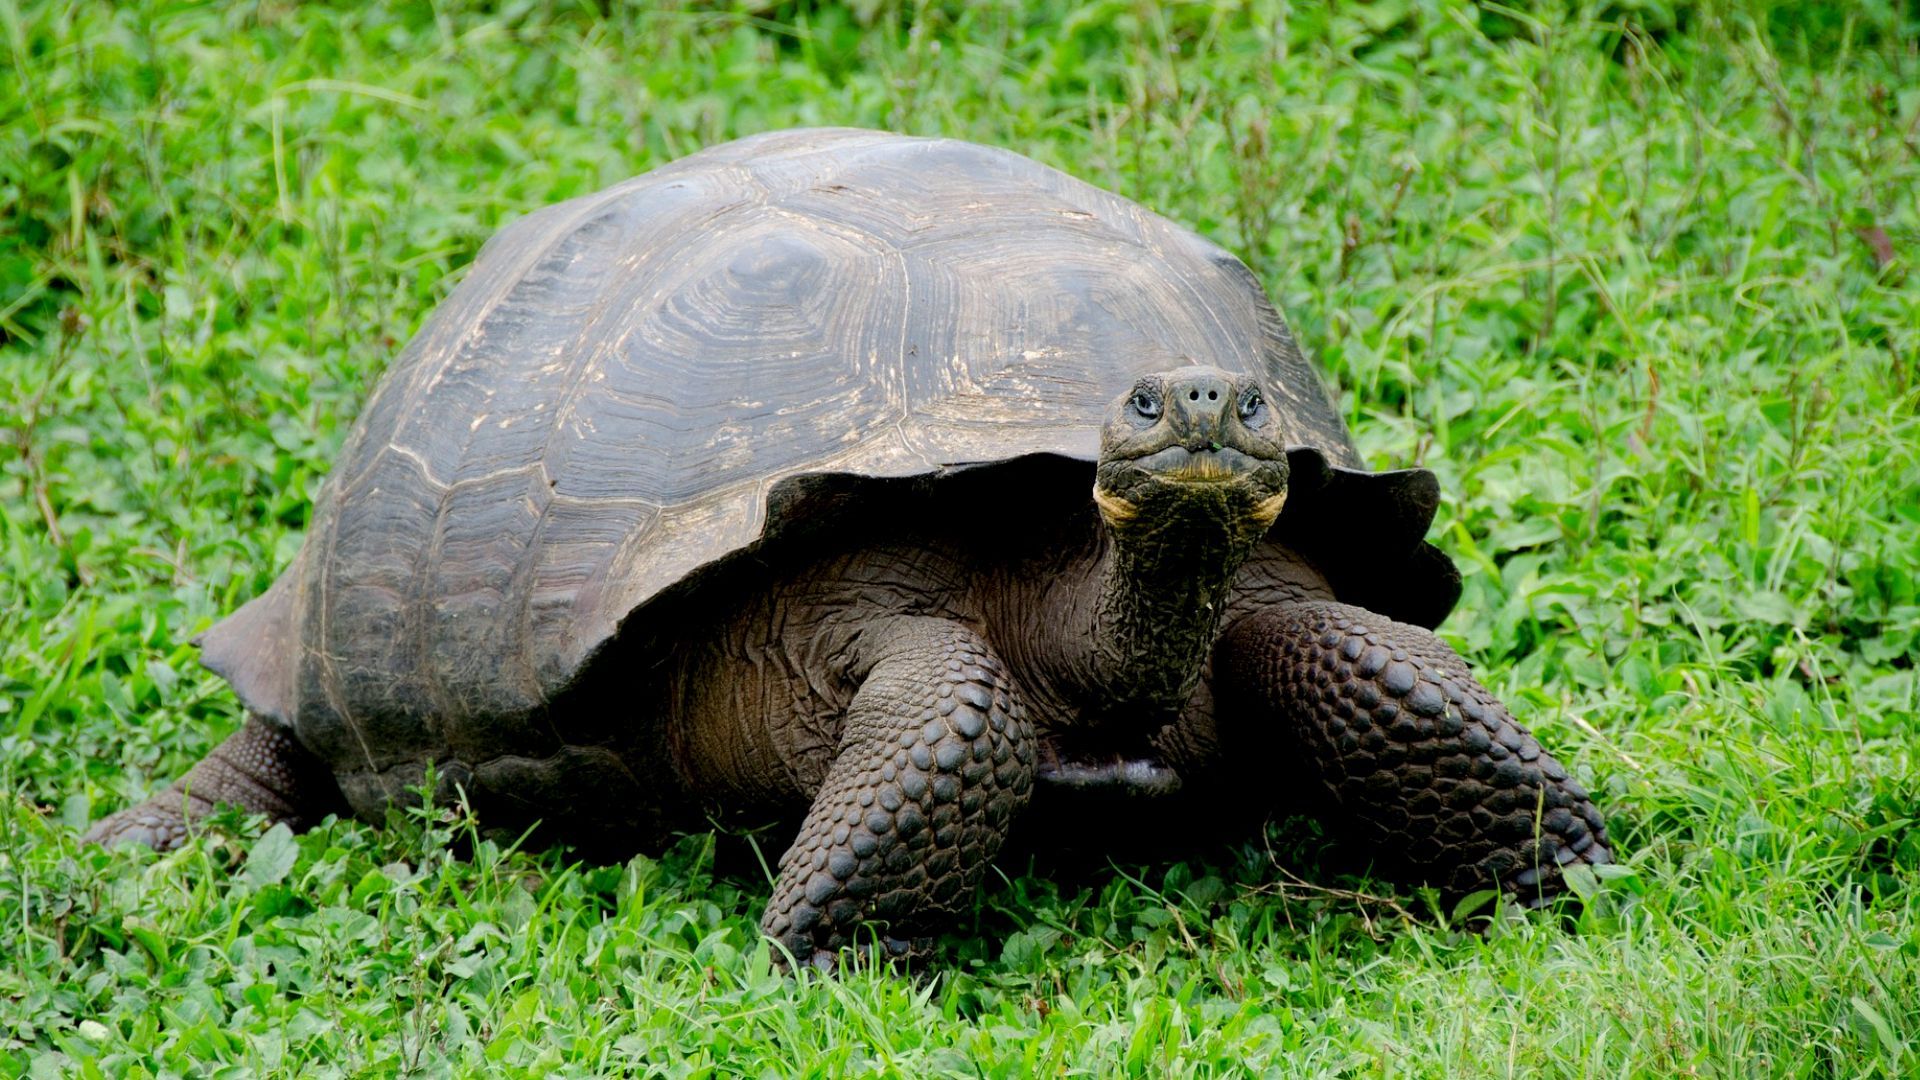 a large tortoise is sitting on top of a lush green field in the Galapgos